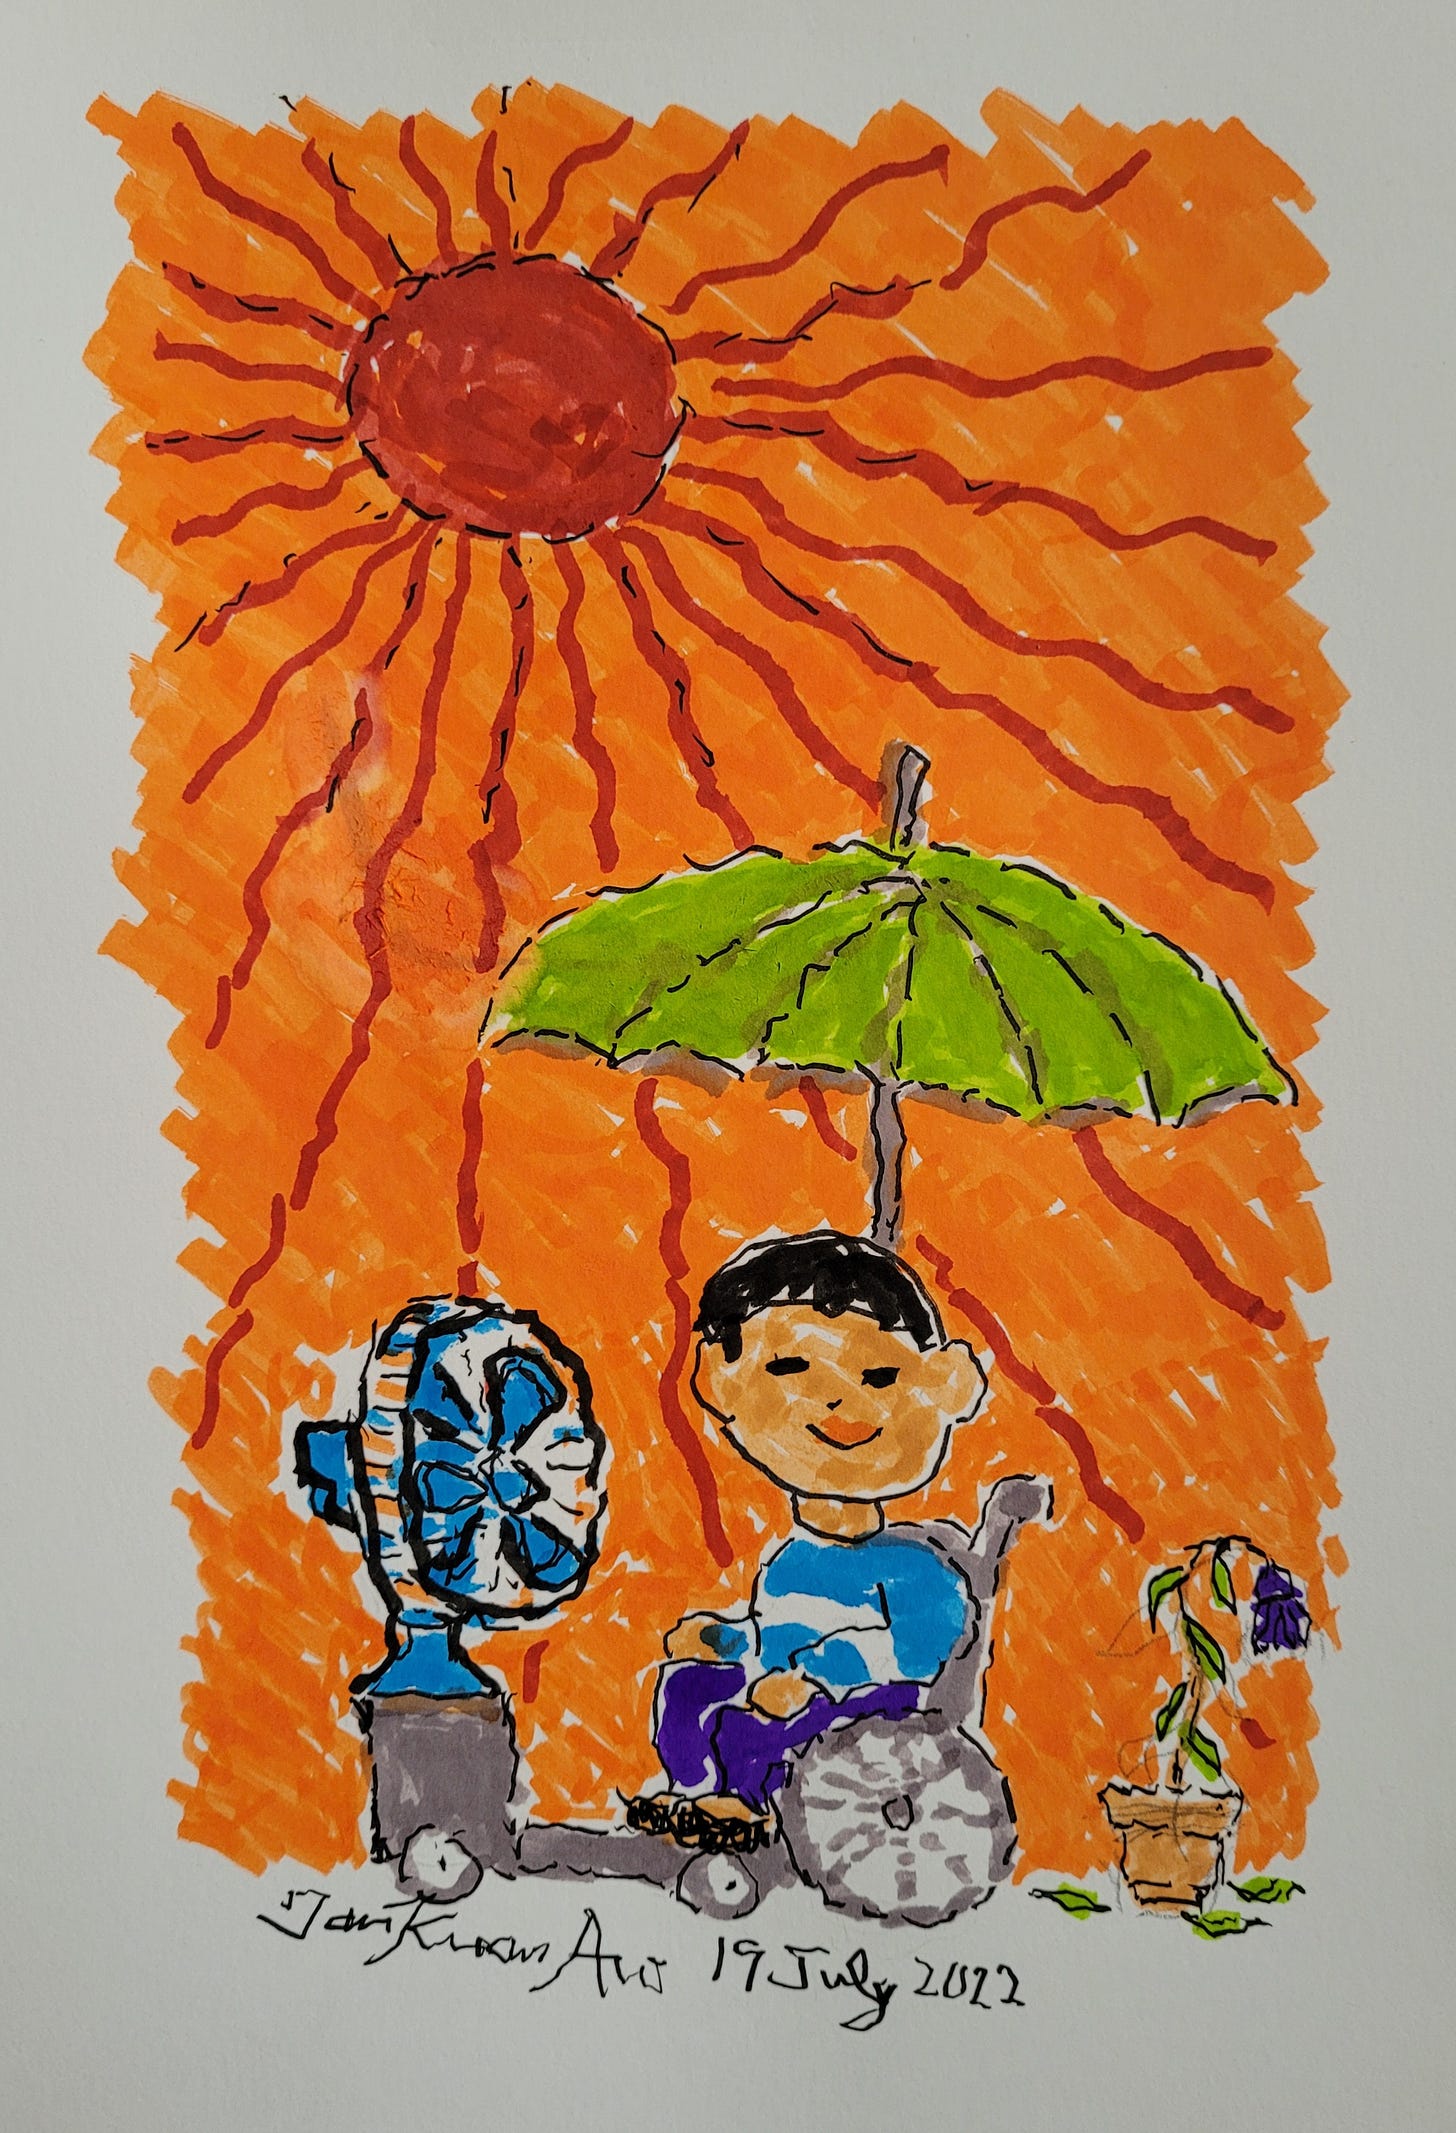 A watercolour illustration of a young man sitting in a wheelchair under the sun. The sun is a large red ball dominating the top half, and red rays stretch outwards against a hot orange background. The young man has light brown skin, black hair, a small smile, and a blue jumper. On his left is a fan pointing towards him, on his right a wilting flower, and above a green umbrella. Signed Tan Kuan Aw, 19th July 2022